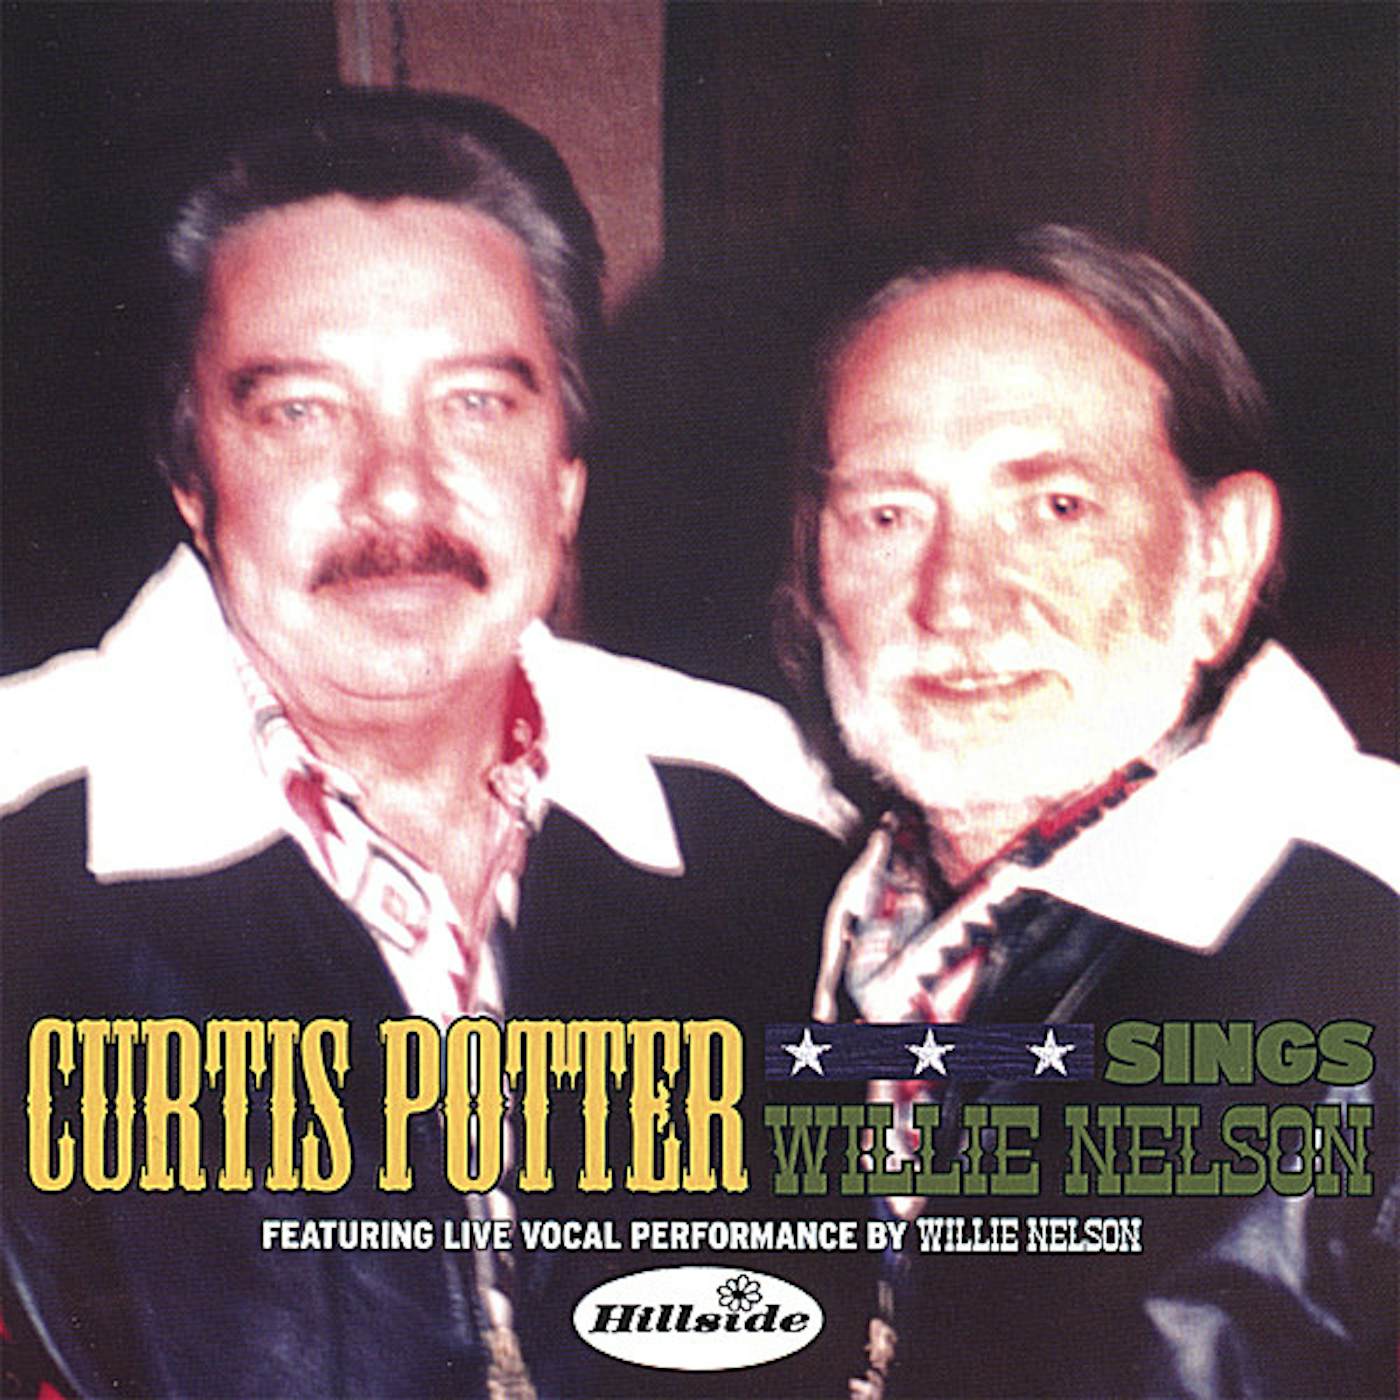 Curtis Potter SINGS WILLIE NELSON CD